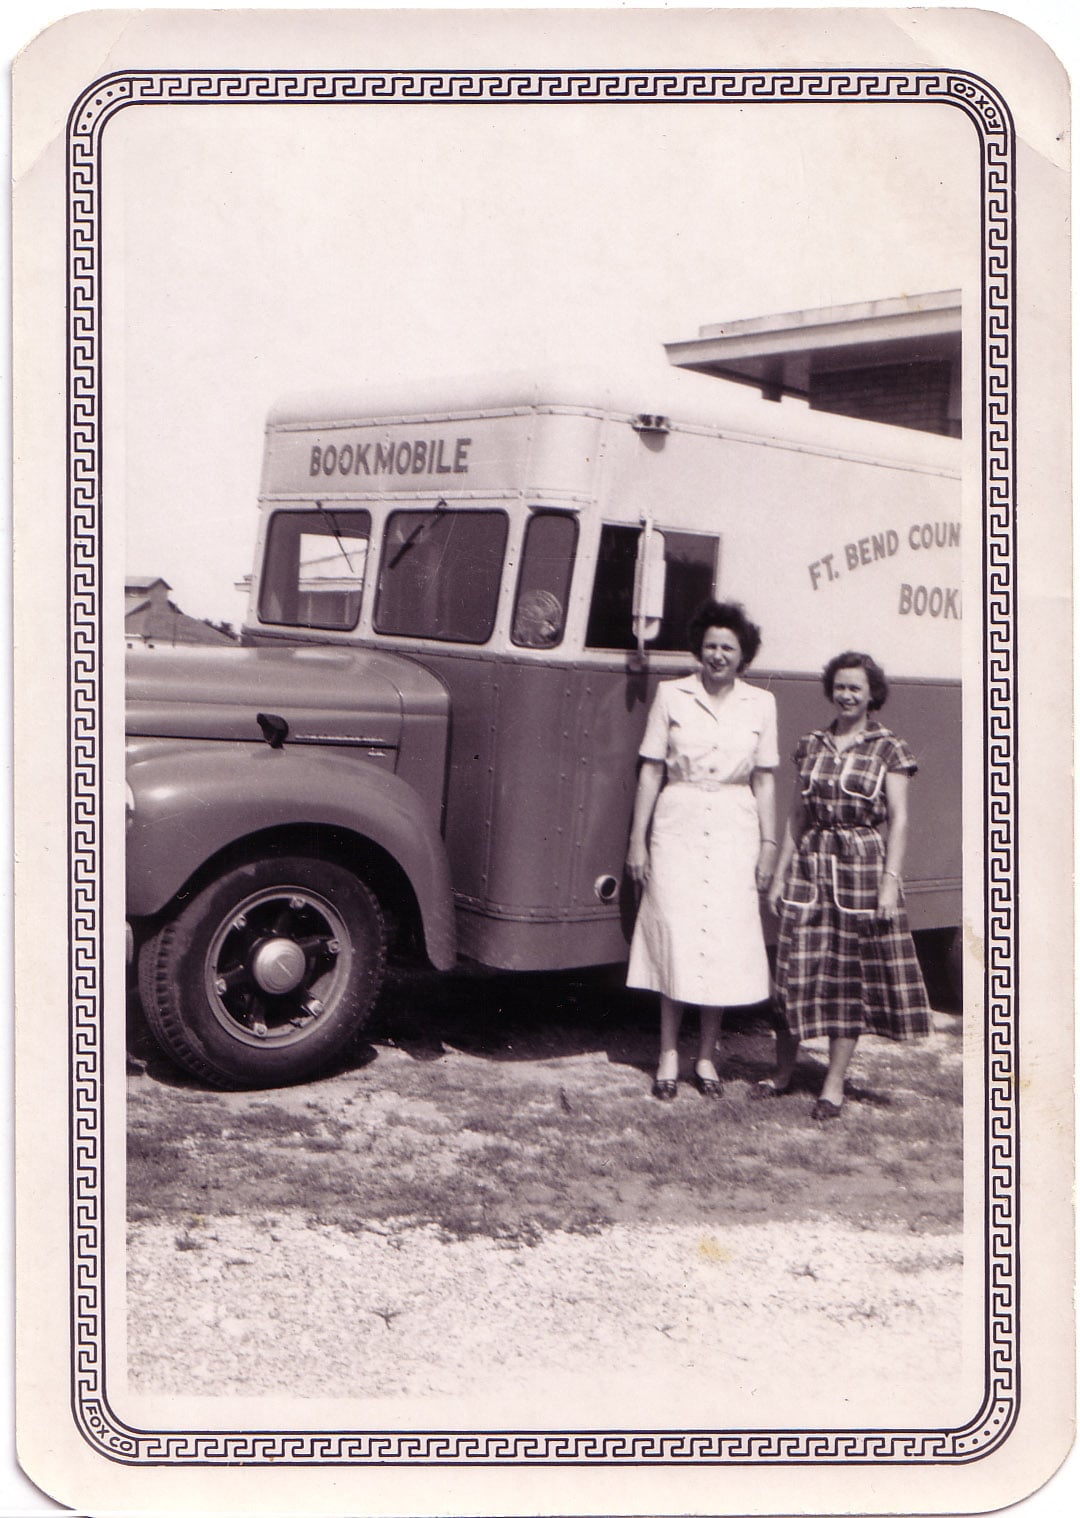 Historic Fort Bend County Book Mobile